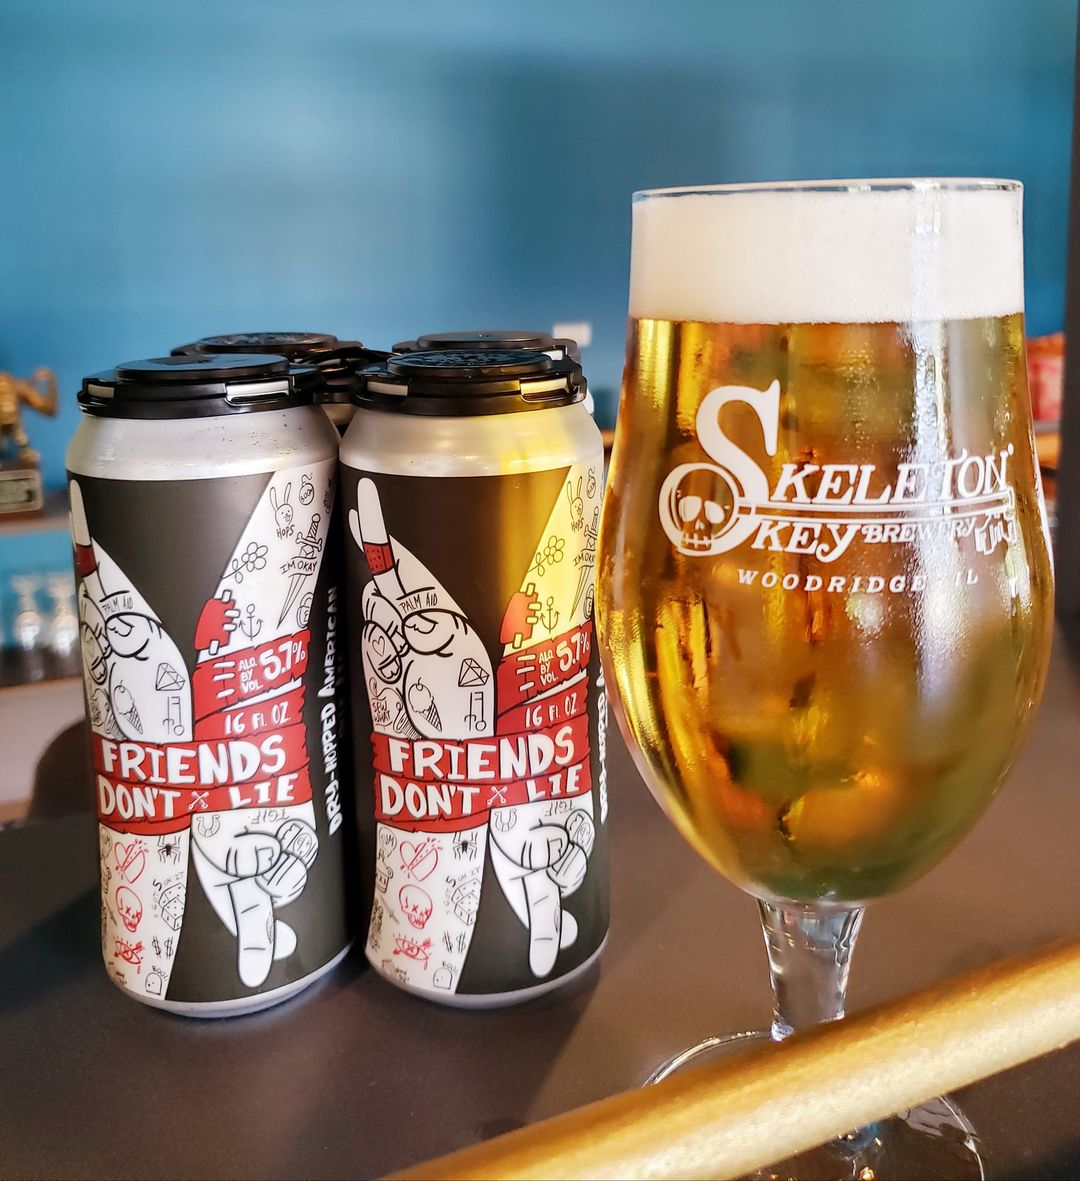 Cans and glass of Friends Dont' Lie by Skeleton Key Brewery